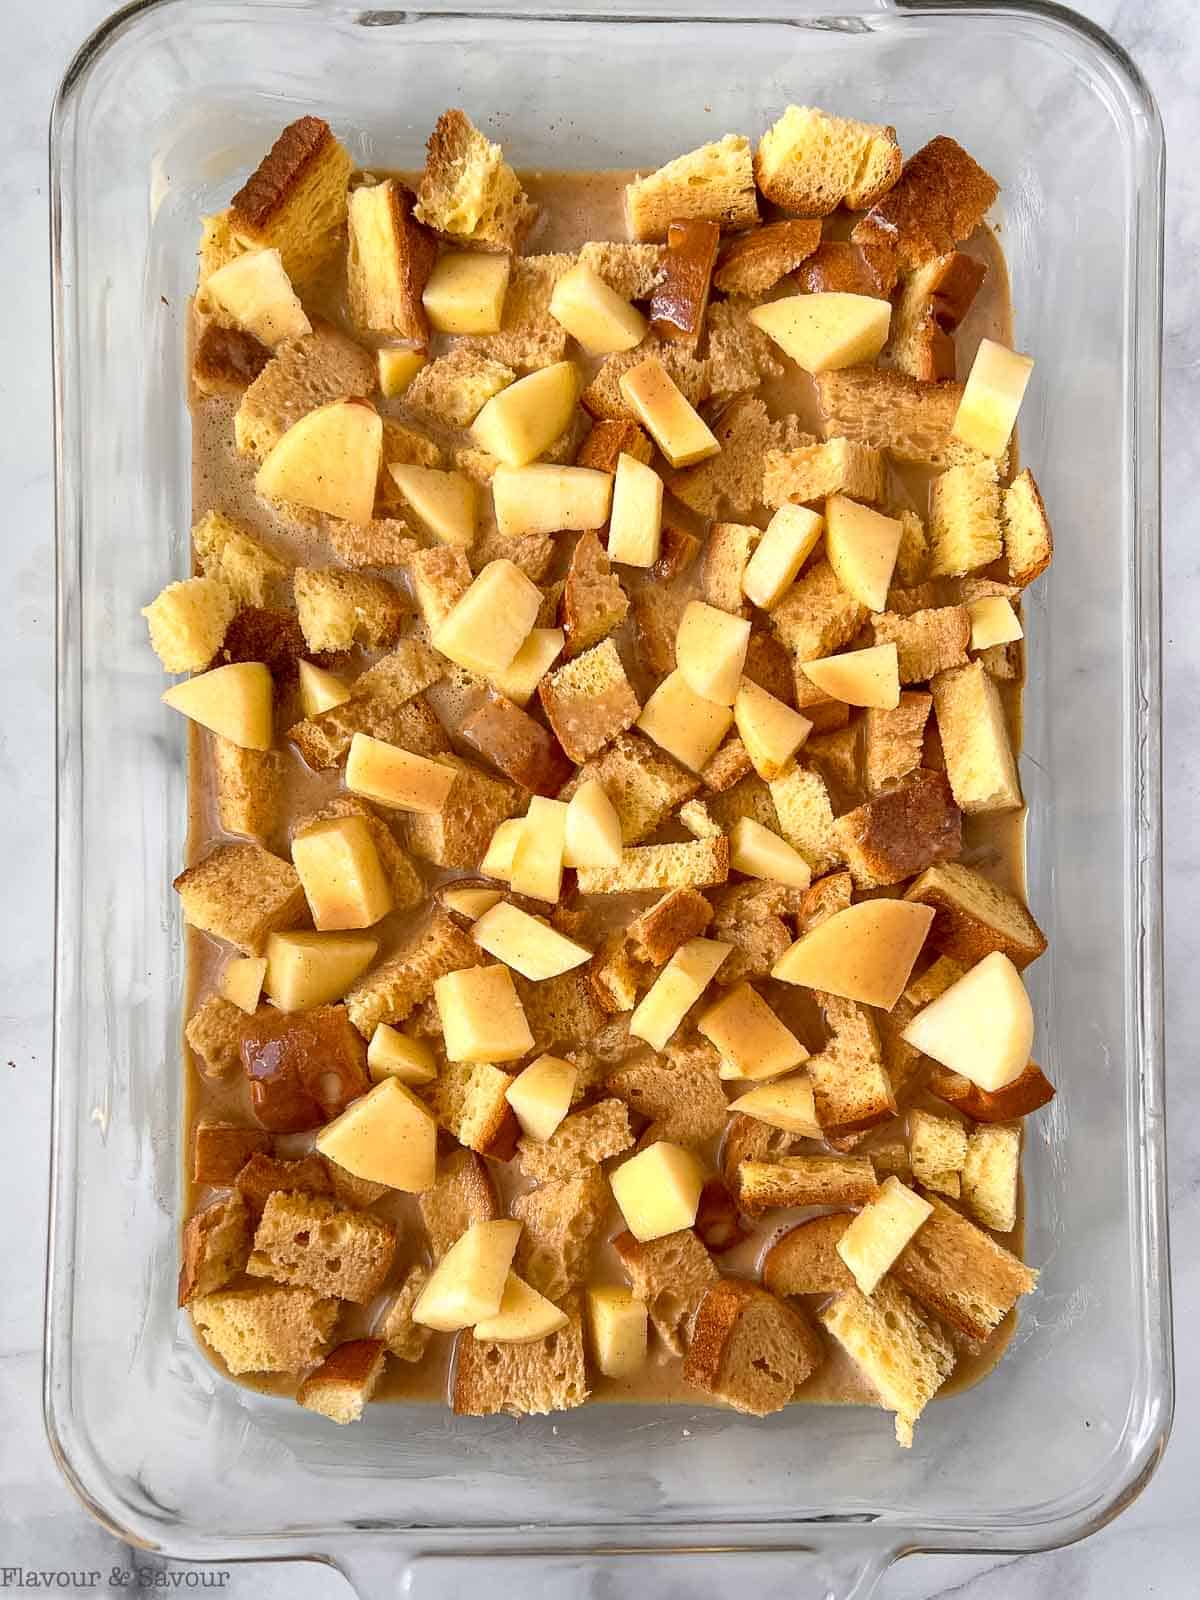 Bread, apples and custard filling layered in a casserole dish for Apple Cinnamon French Toast.